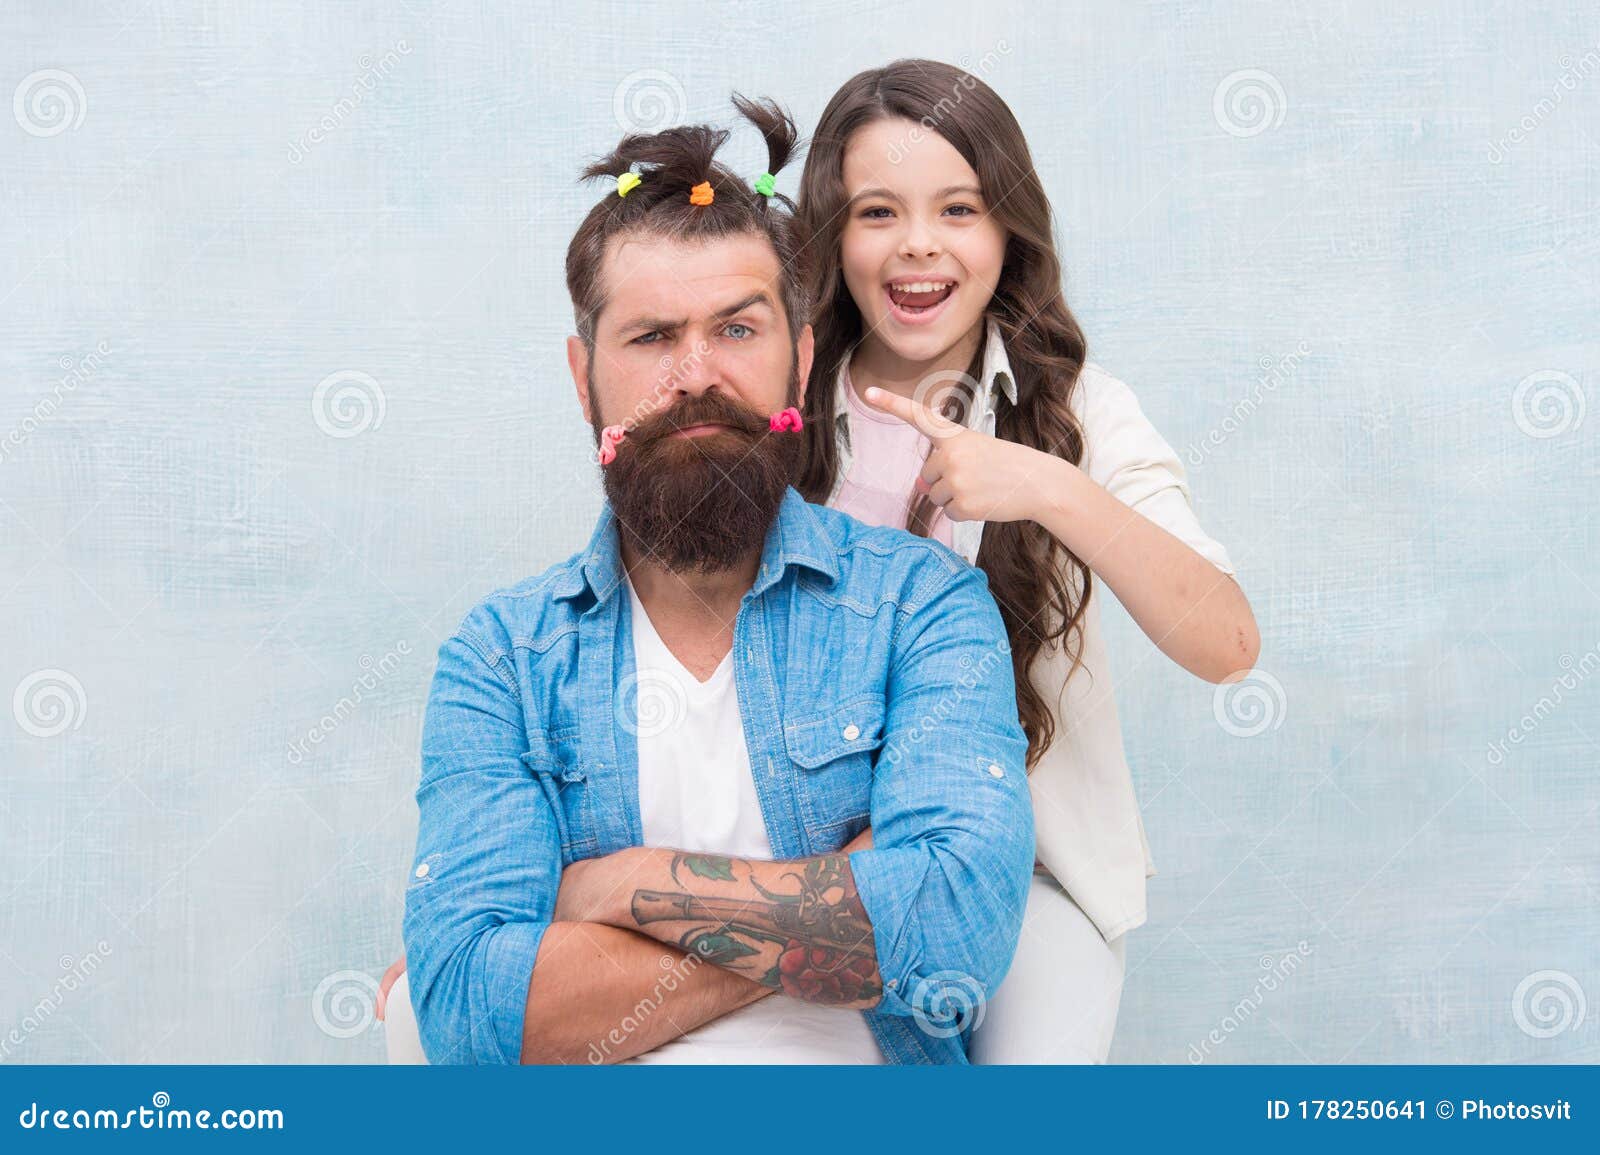 caitlin busby share daddy with cute daughter beautiful hair photos